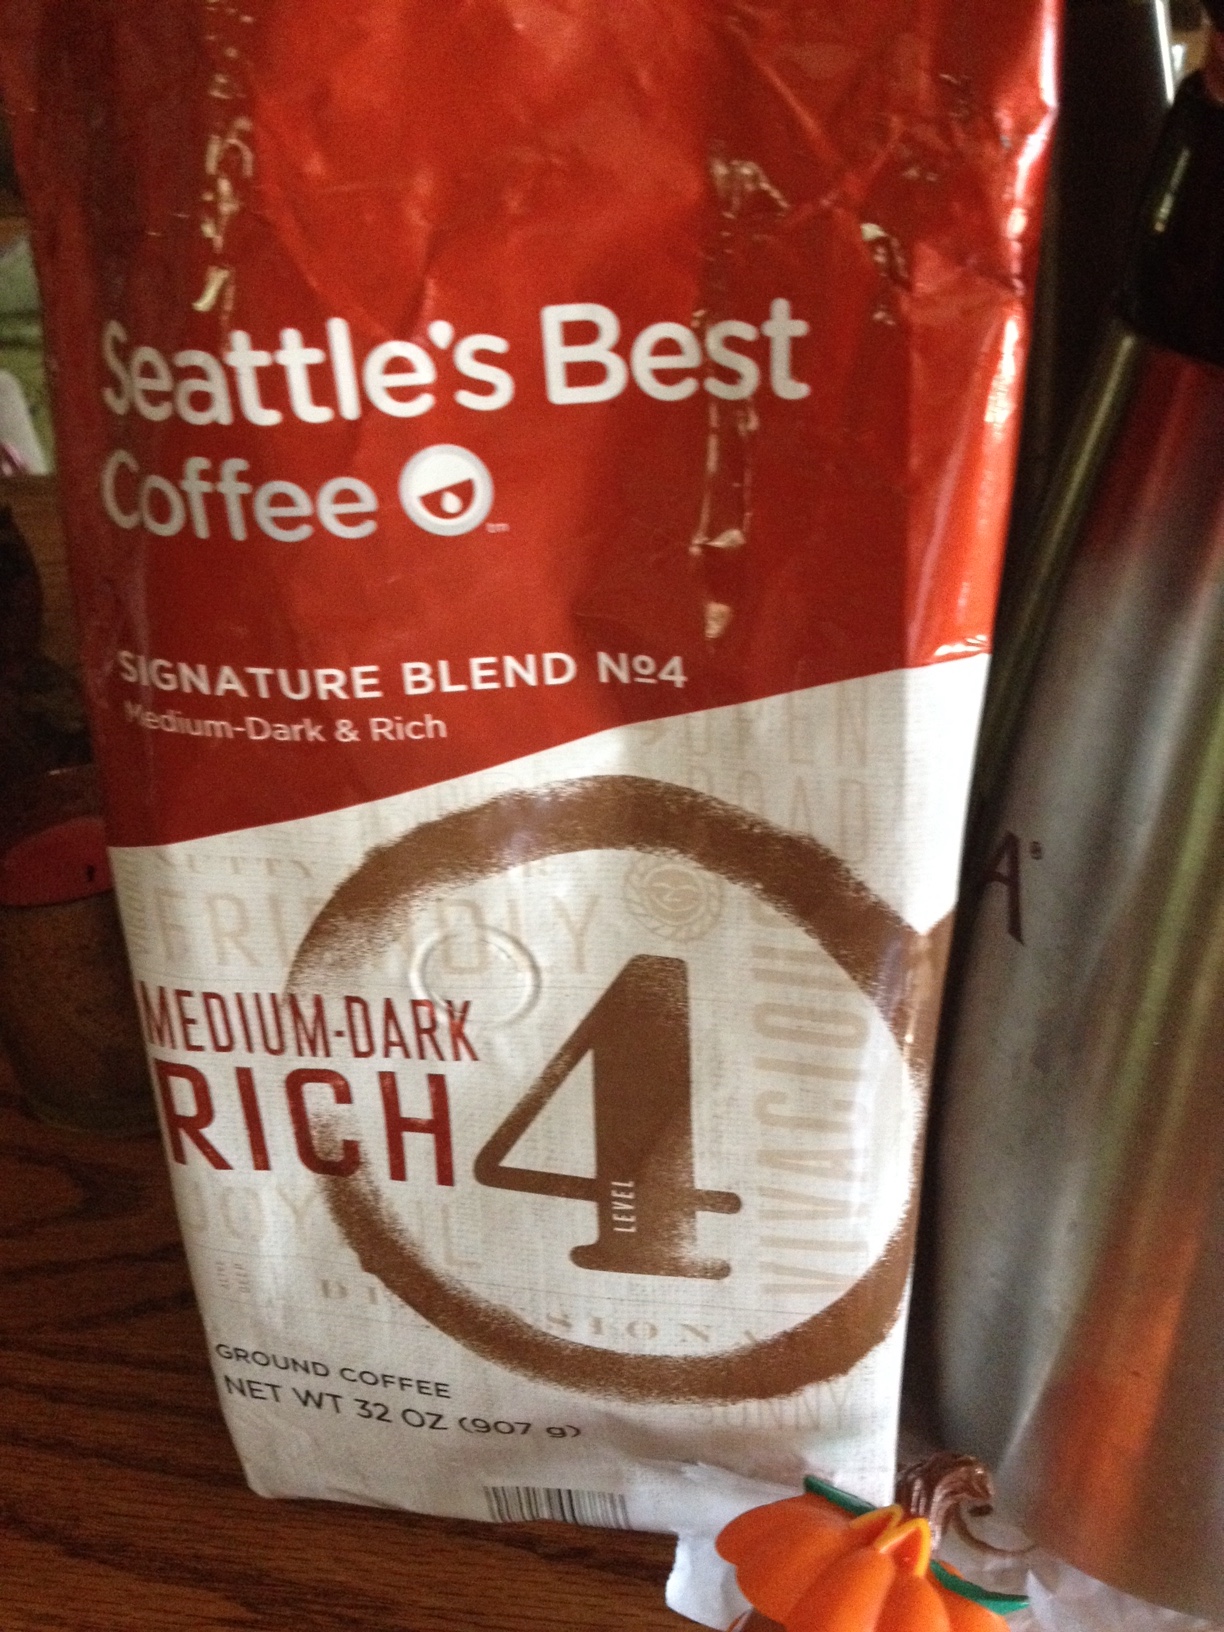 Photo showing Seattle's Best ground coffee